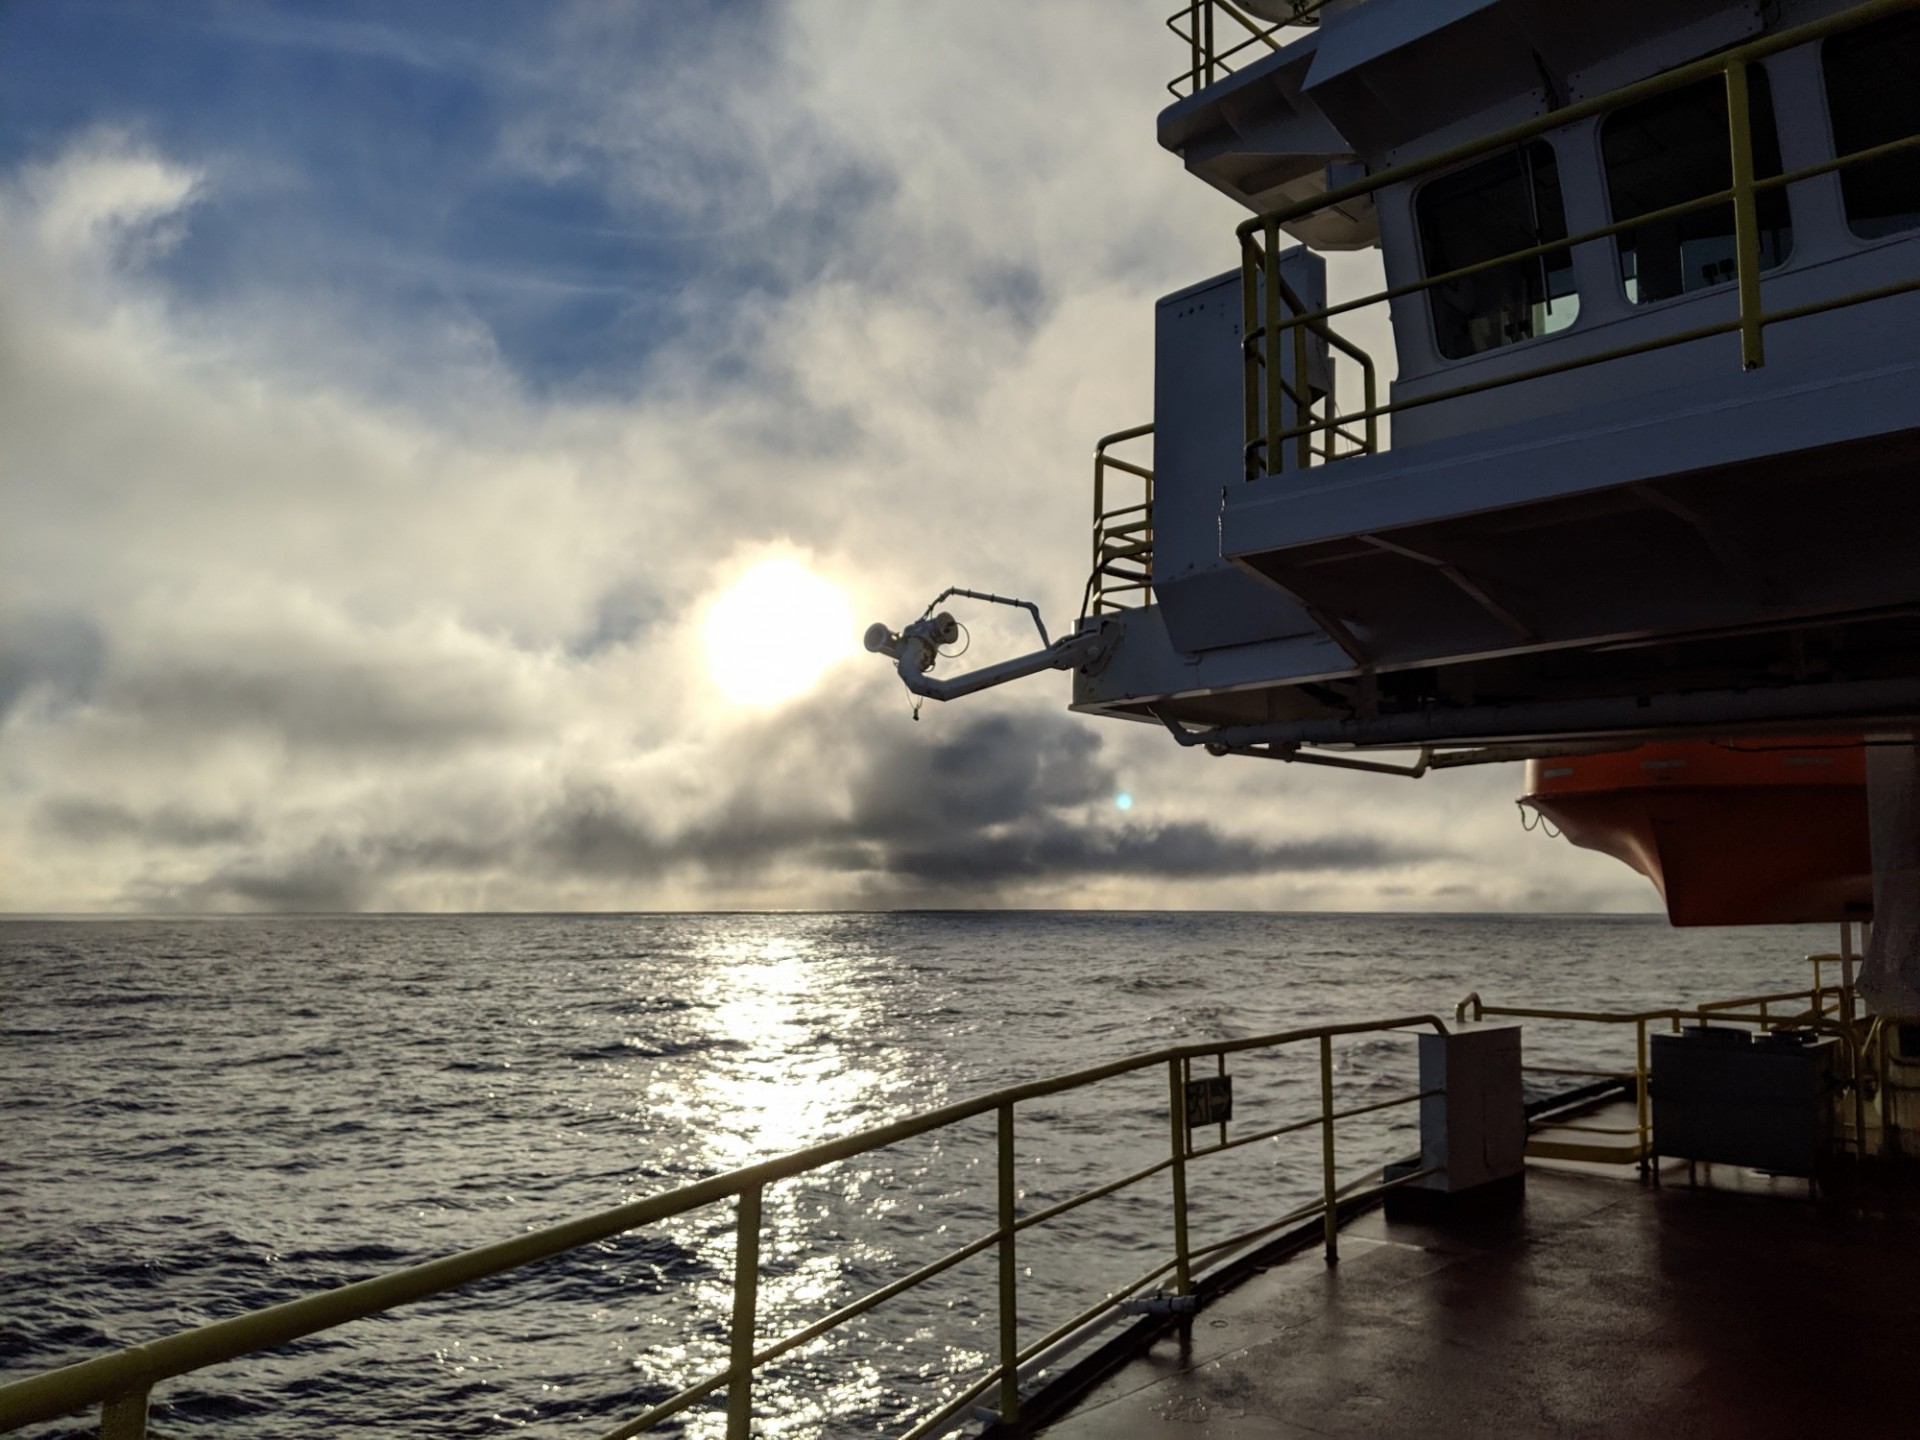 The Southern Ocean viewed from the R/V JOIDES Resolution